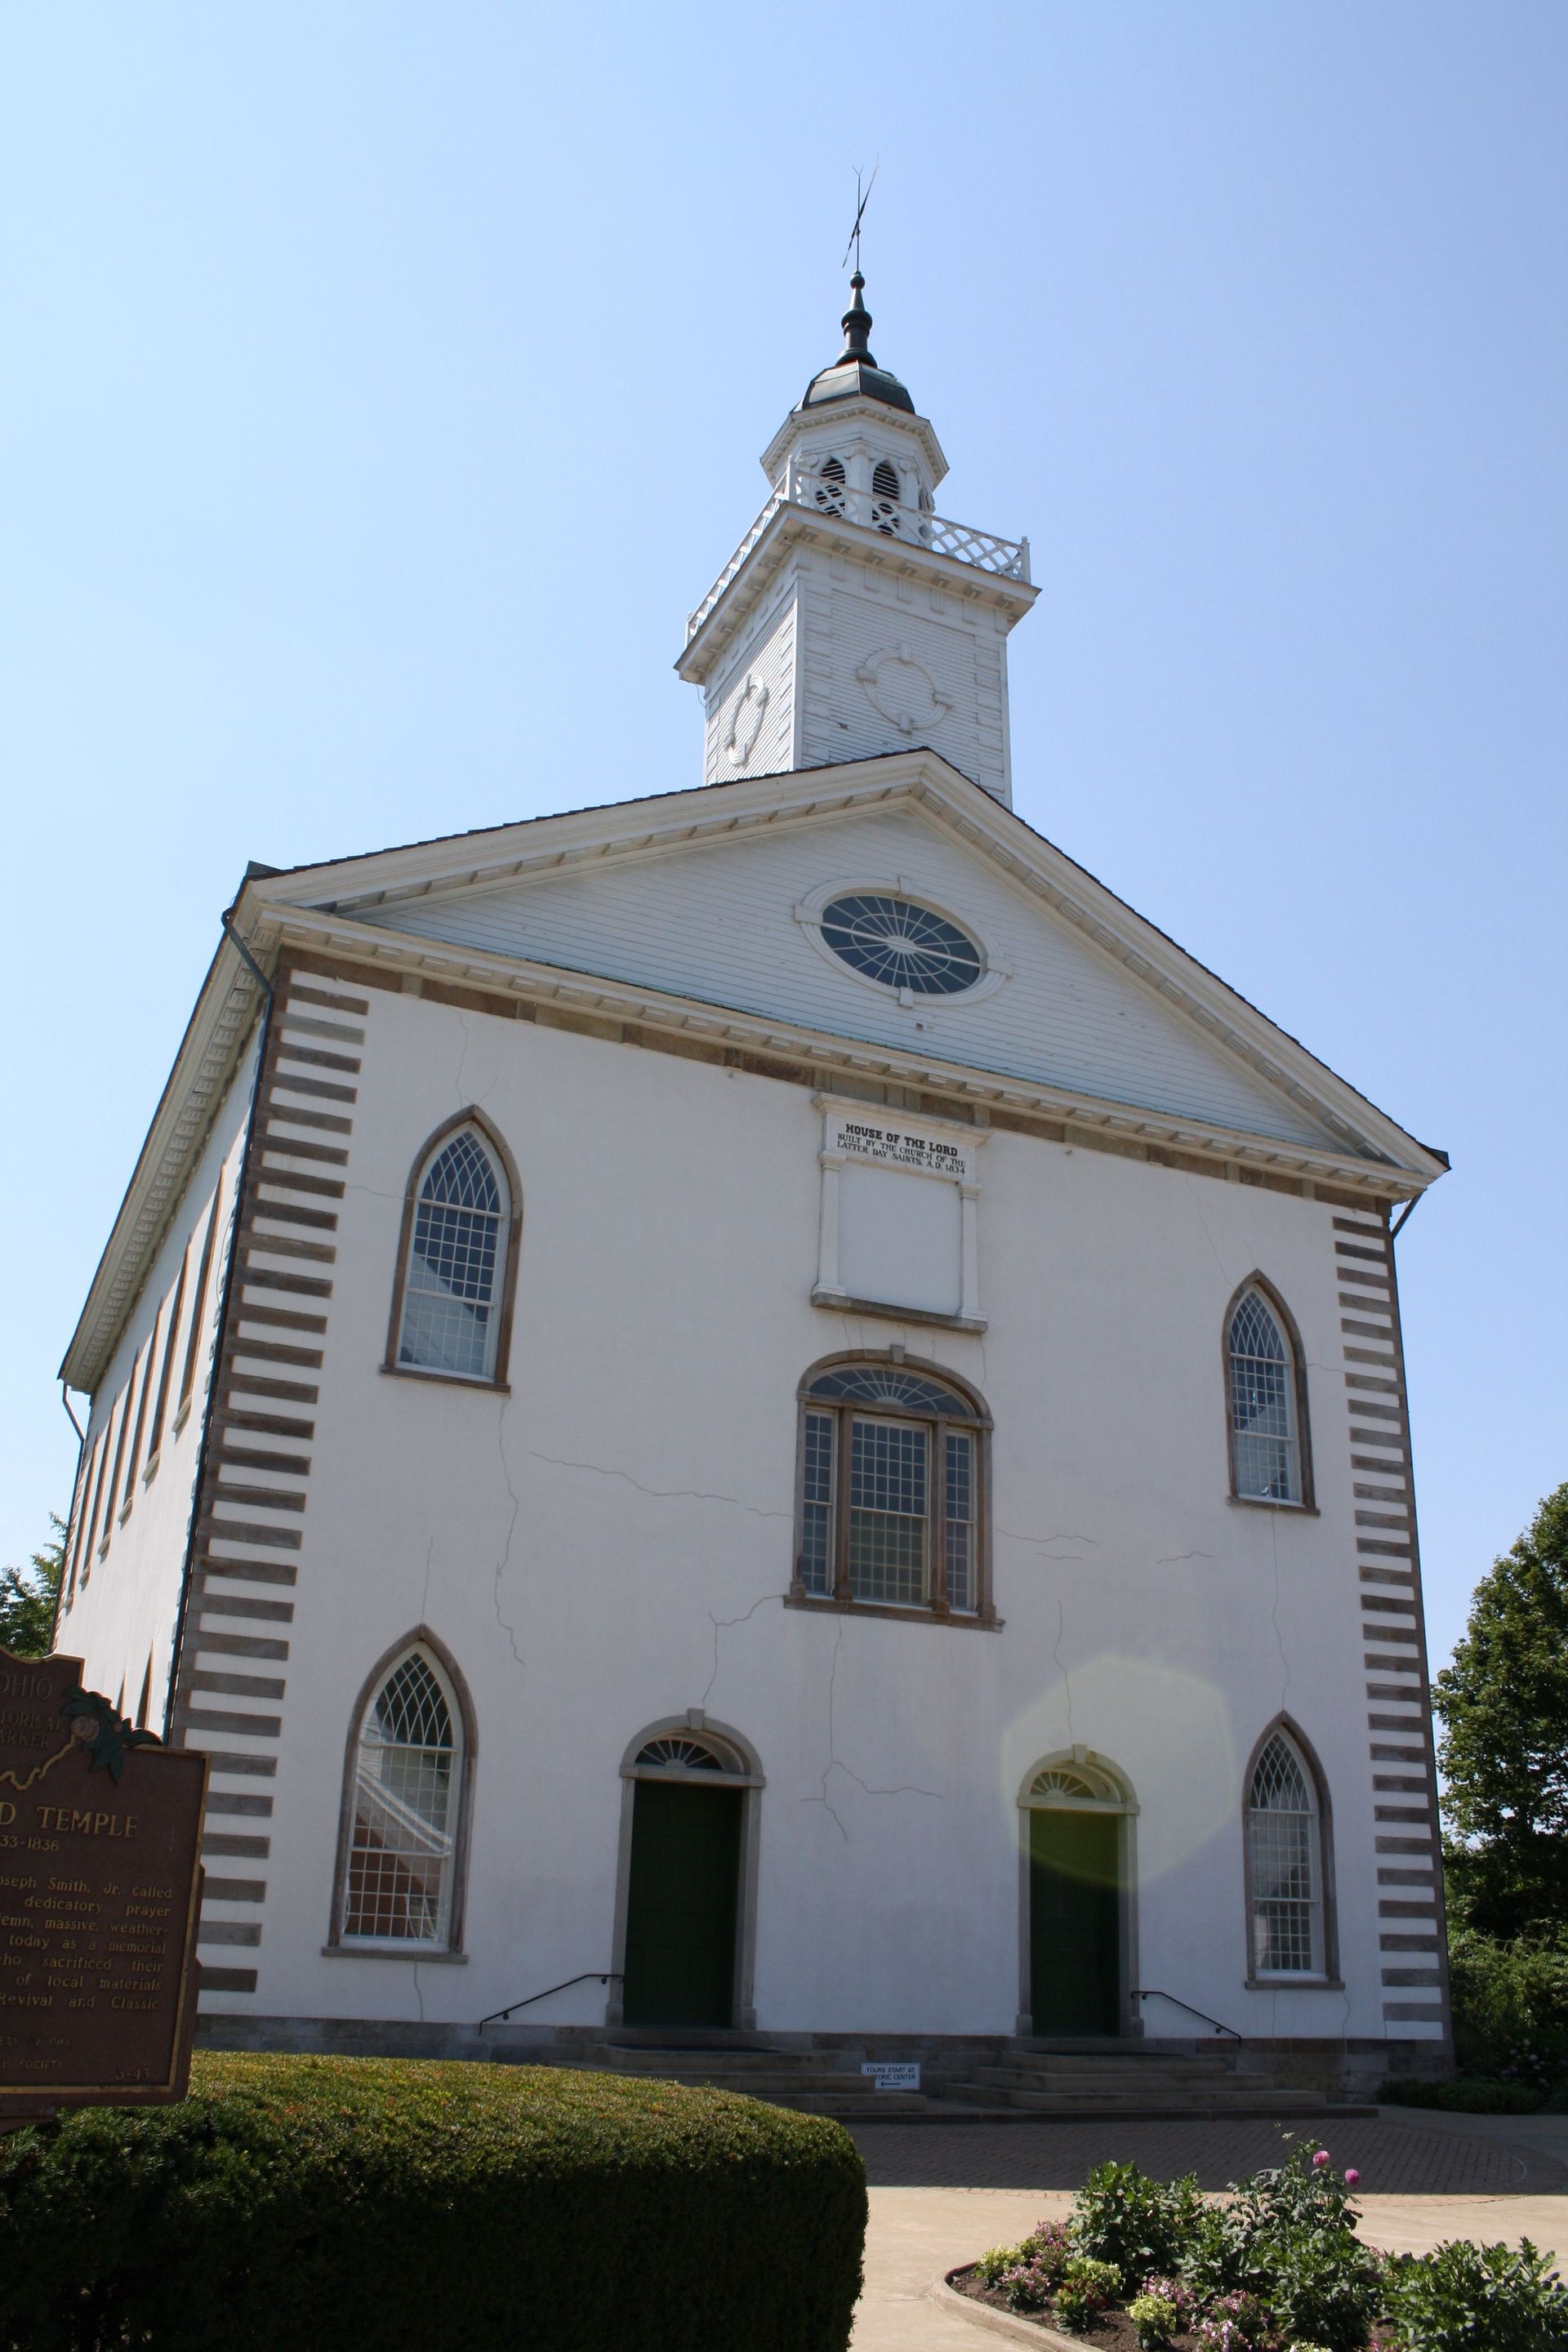 The Kirtland Temple entrance, including scenery and the exterior of the temple.